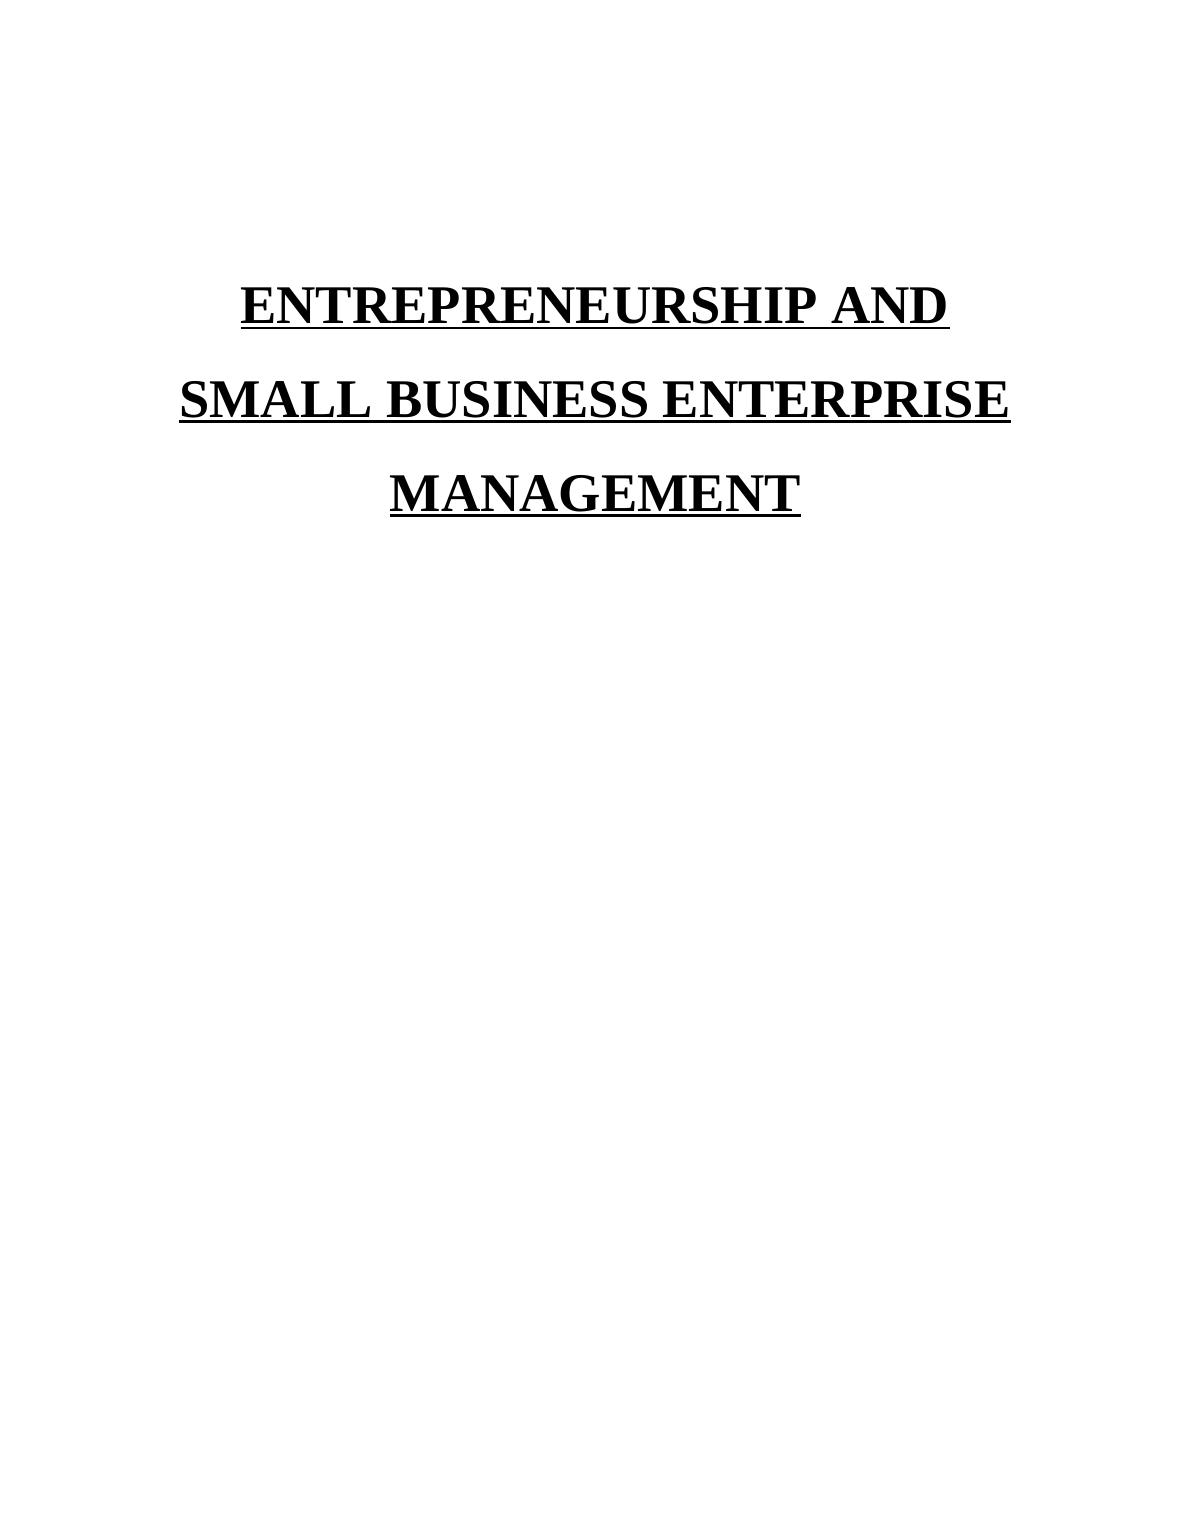 Innovation in Business Operations : Report_1